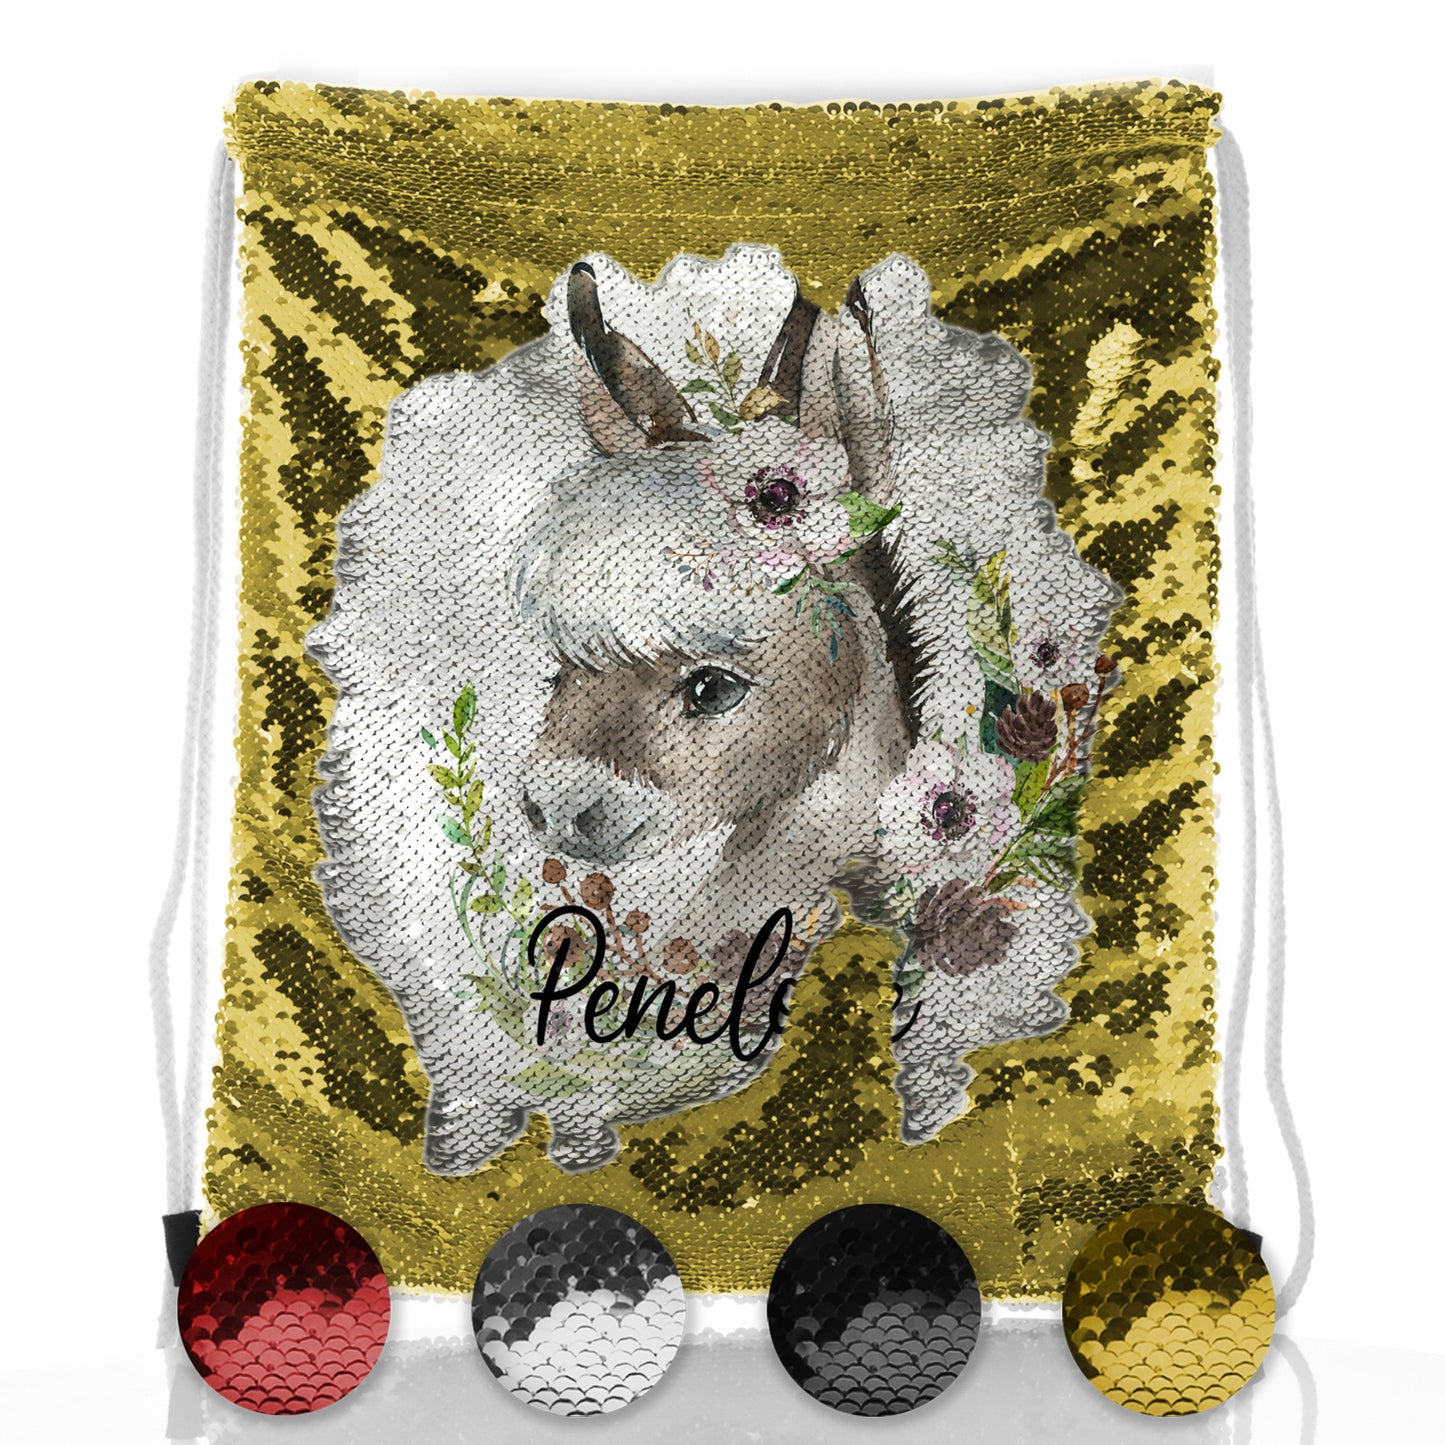 Personalised Sequin Drawstring Backpack with Grey Donkey Pink and White Flowers and Cute Text